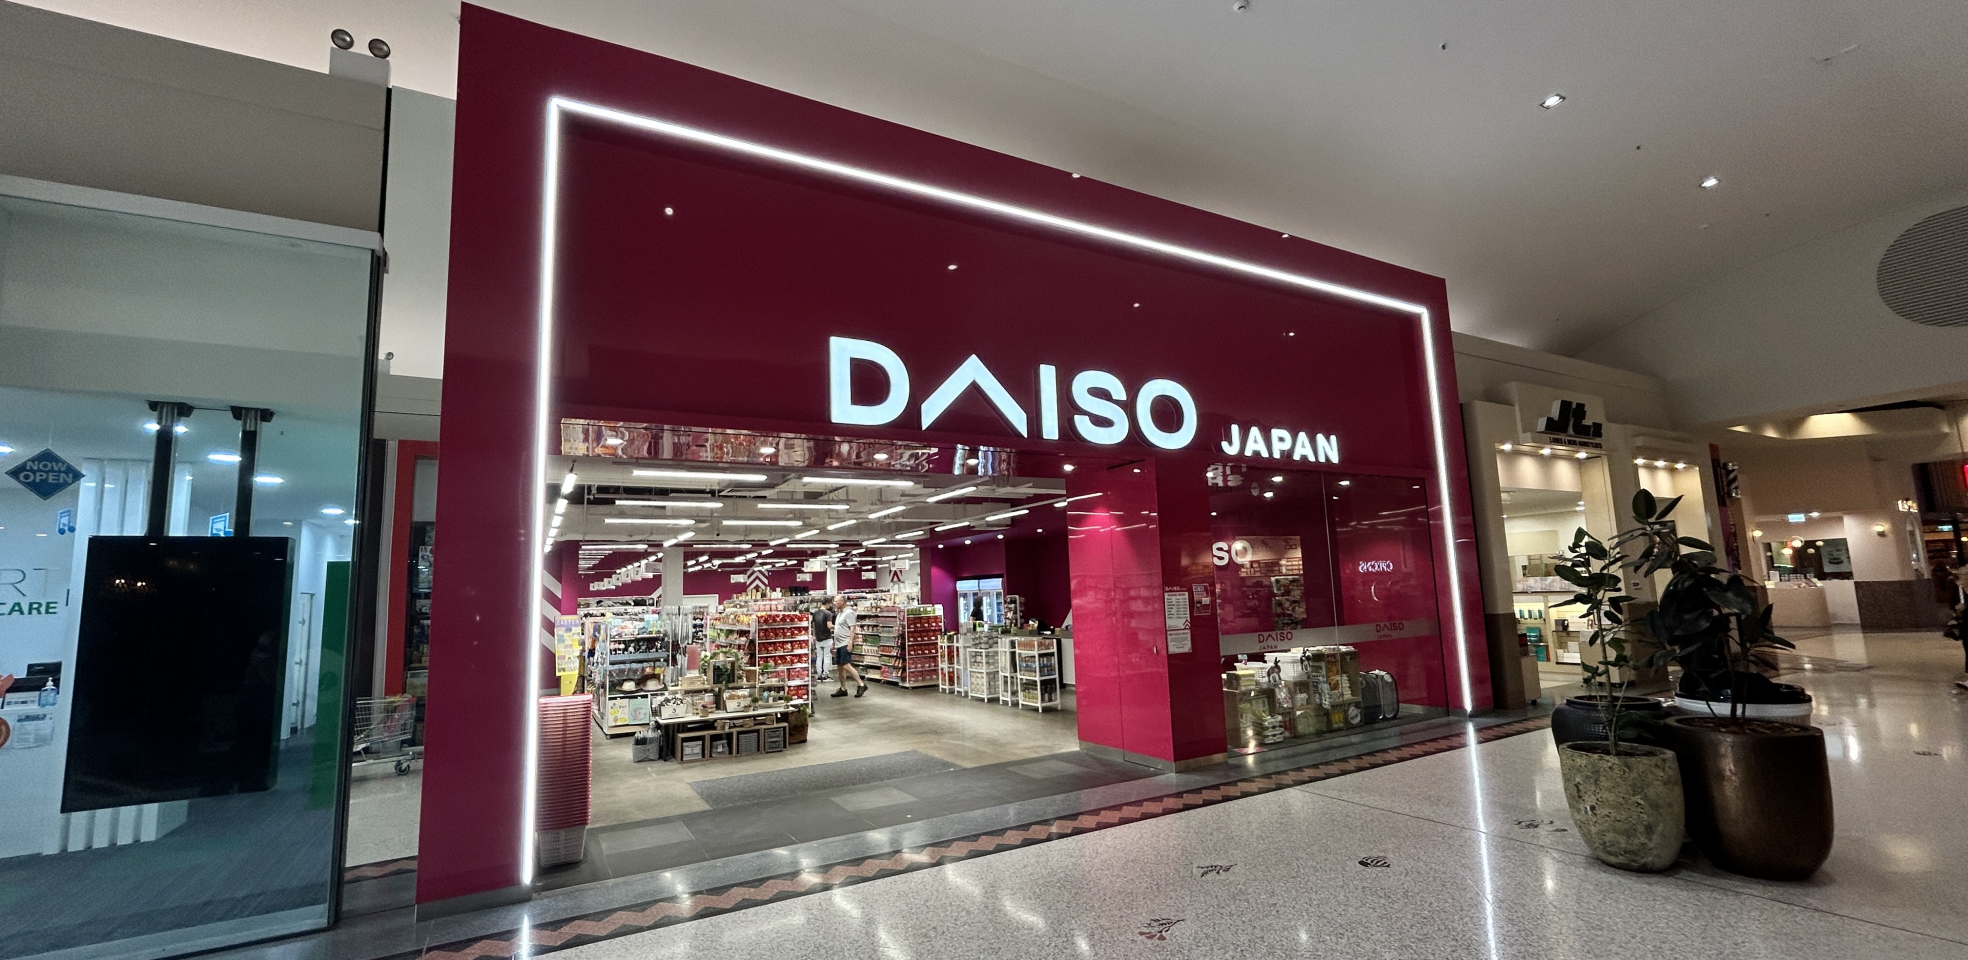 Daiso 1968x960.png